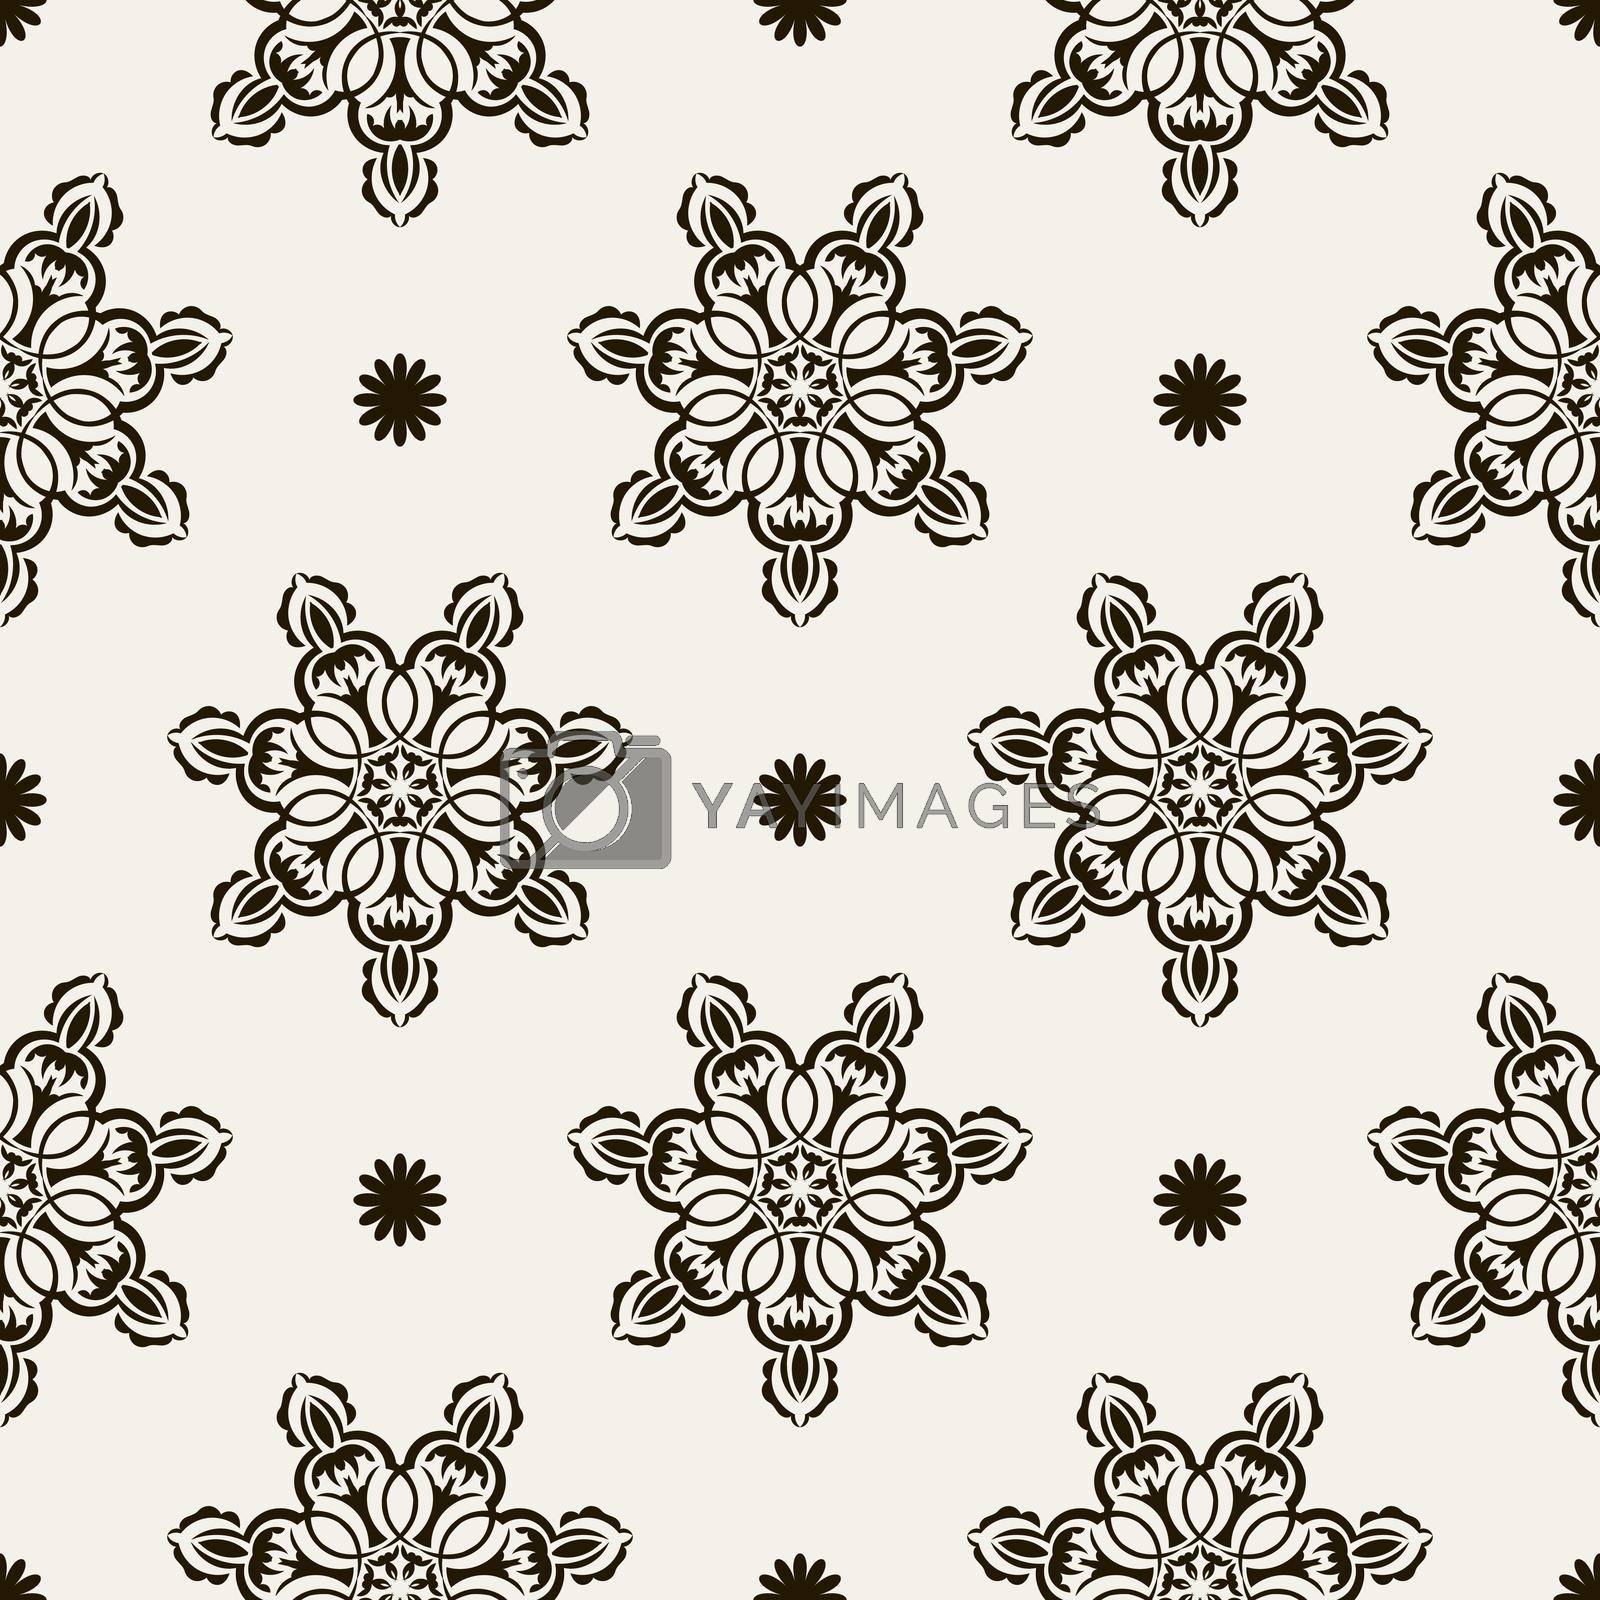 Retro seamless pattern with ornament. Good for clothing, textiles, backgrounds and prints. Vector illustration.